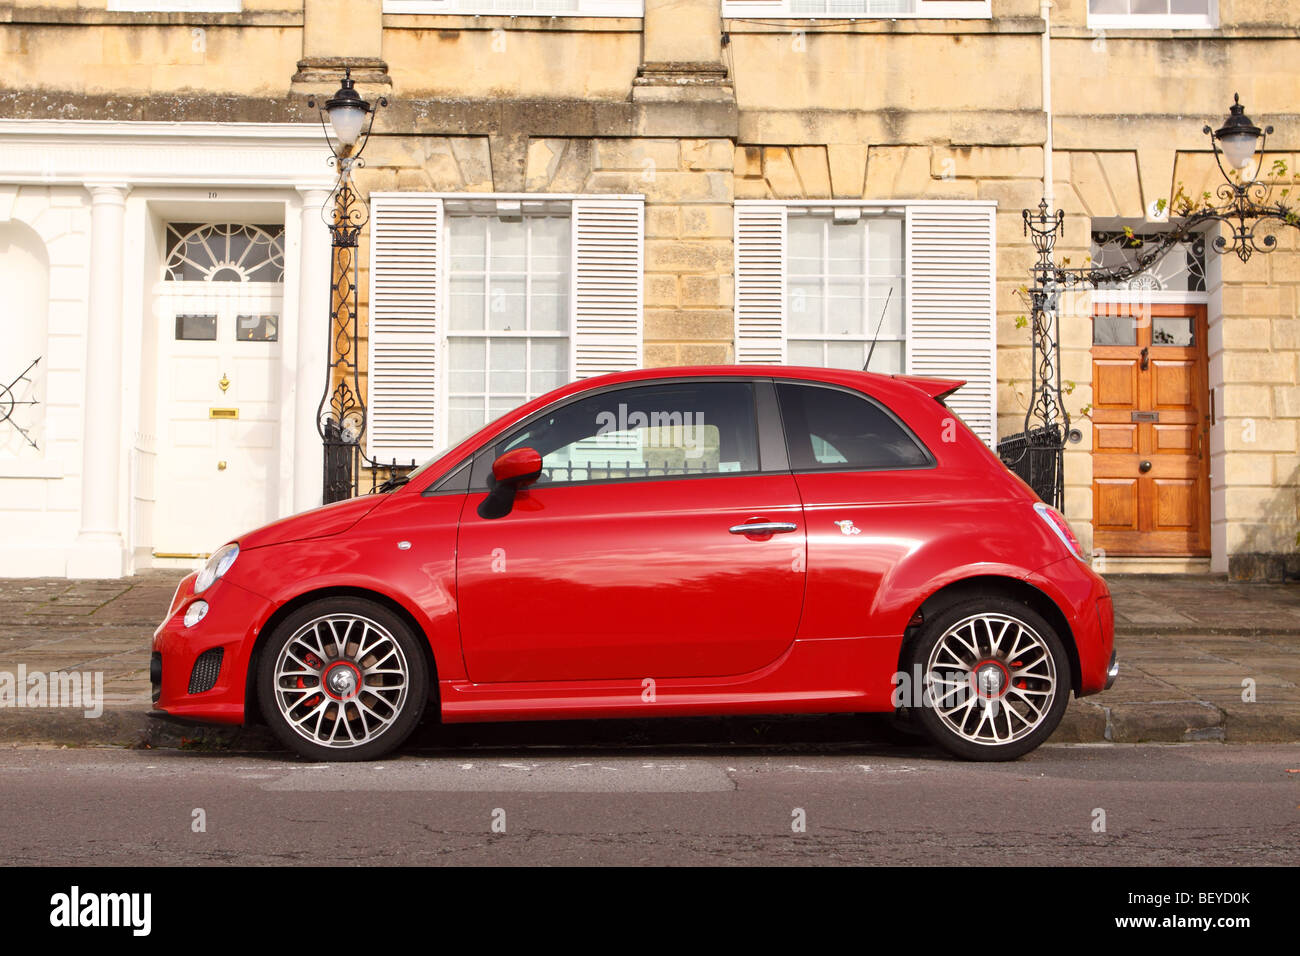 Abarth Fiat 500 performance enhanced production car parked in Bath England Stock Photo